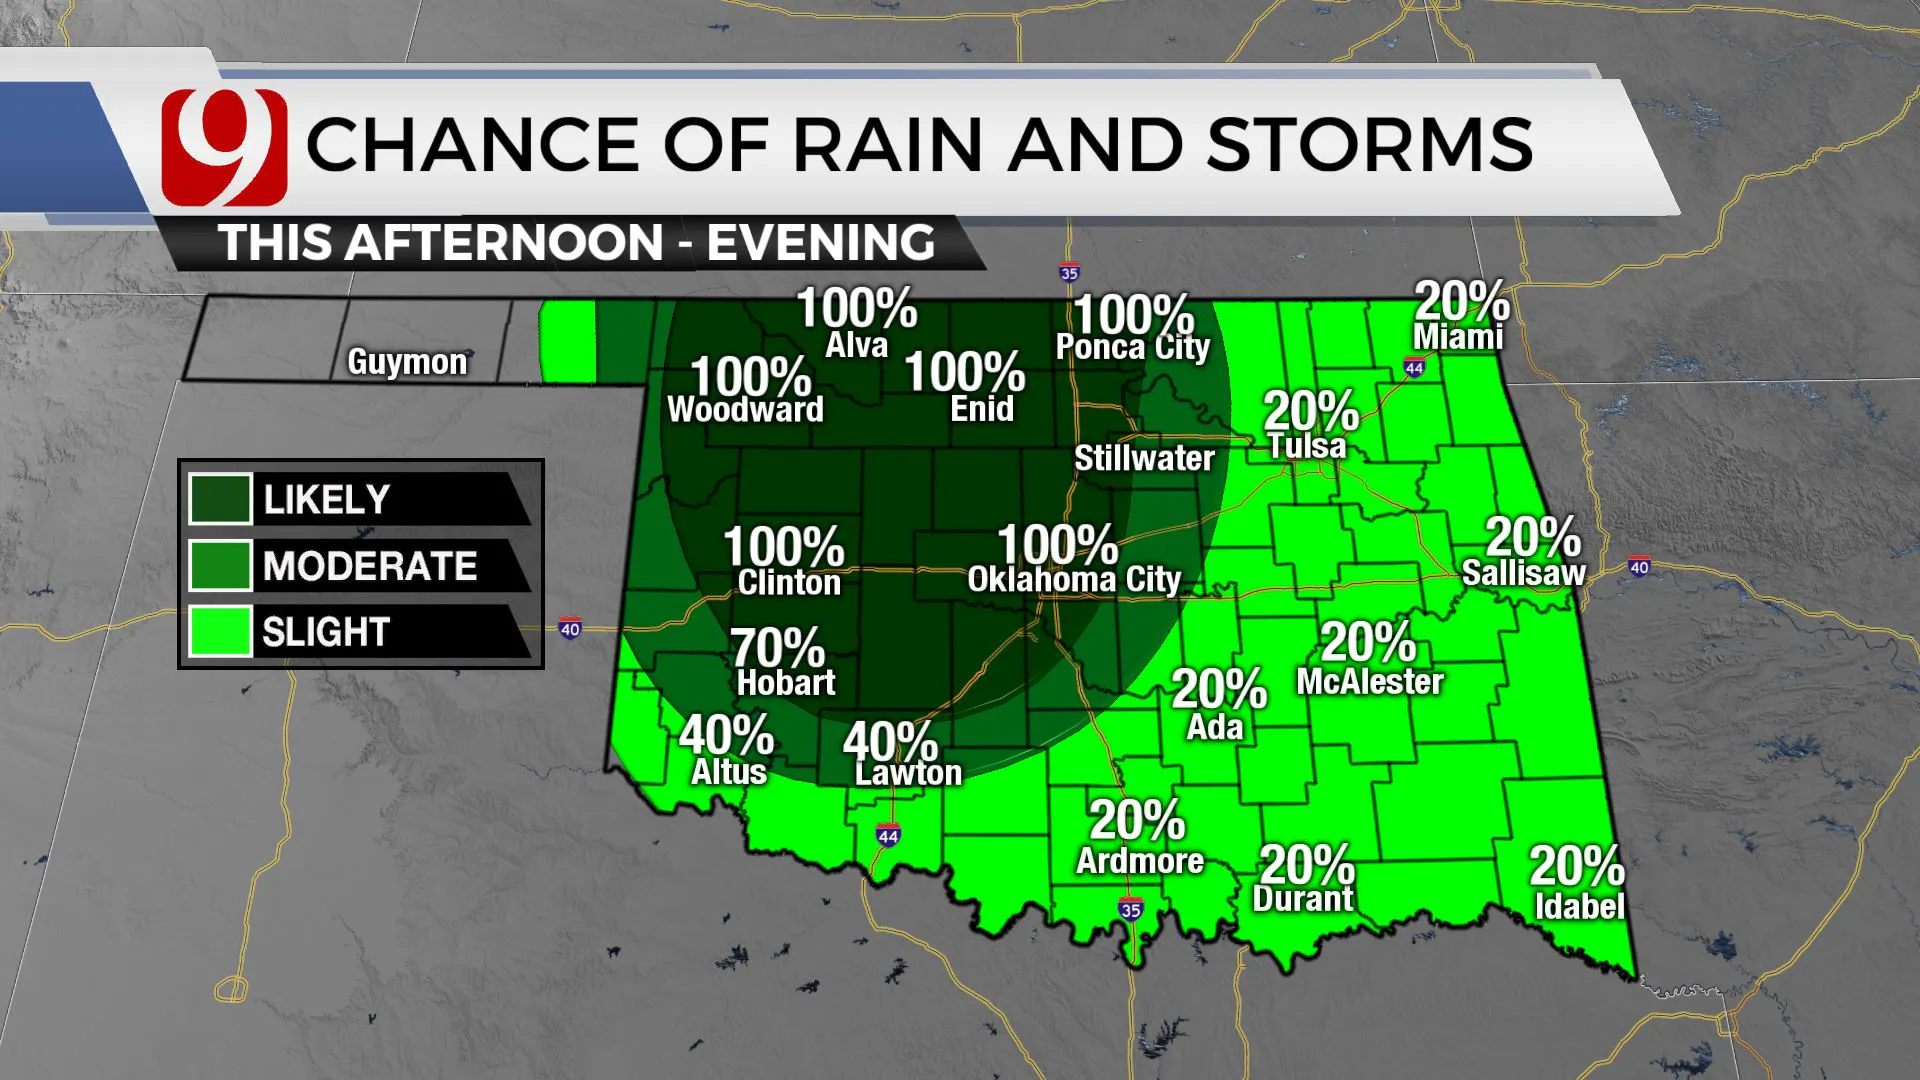 CHANCE OF RAIN/STORMS